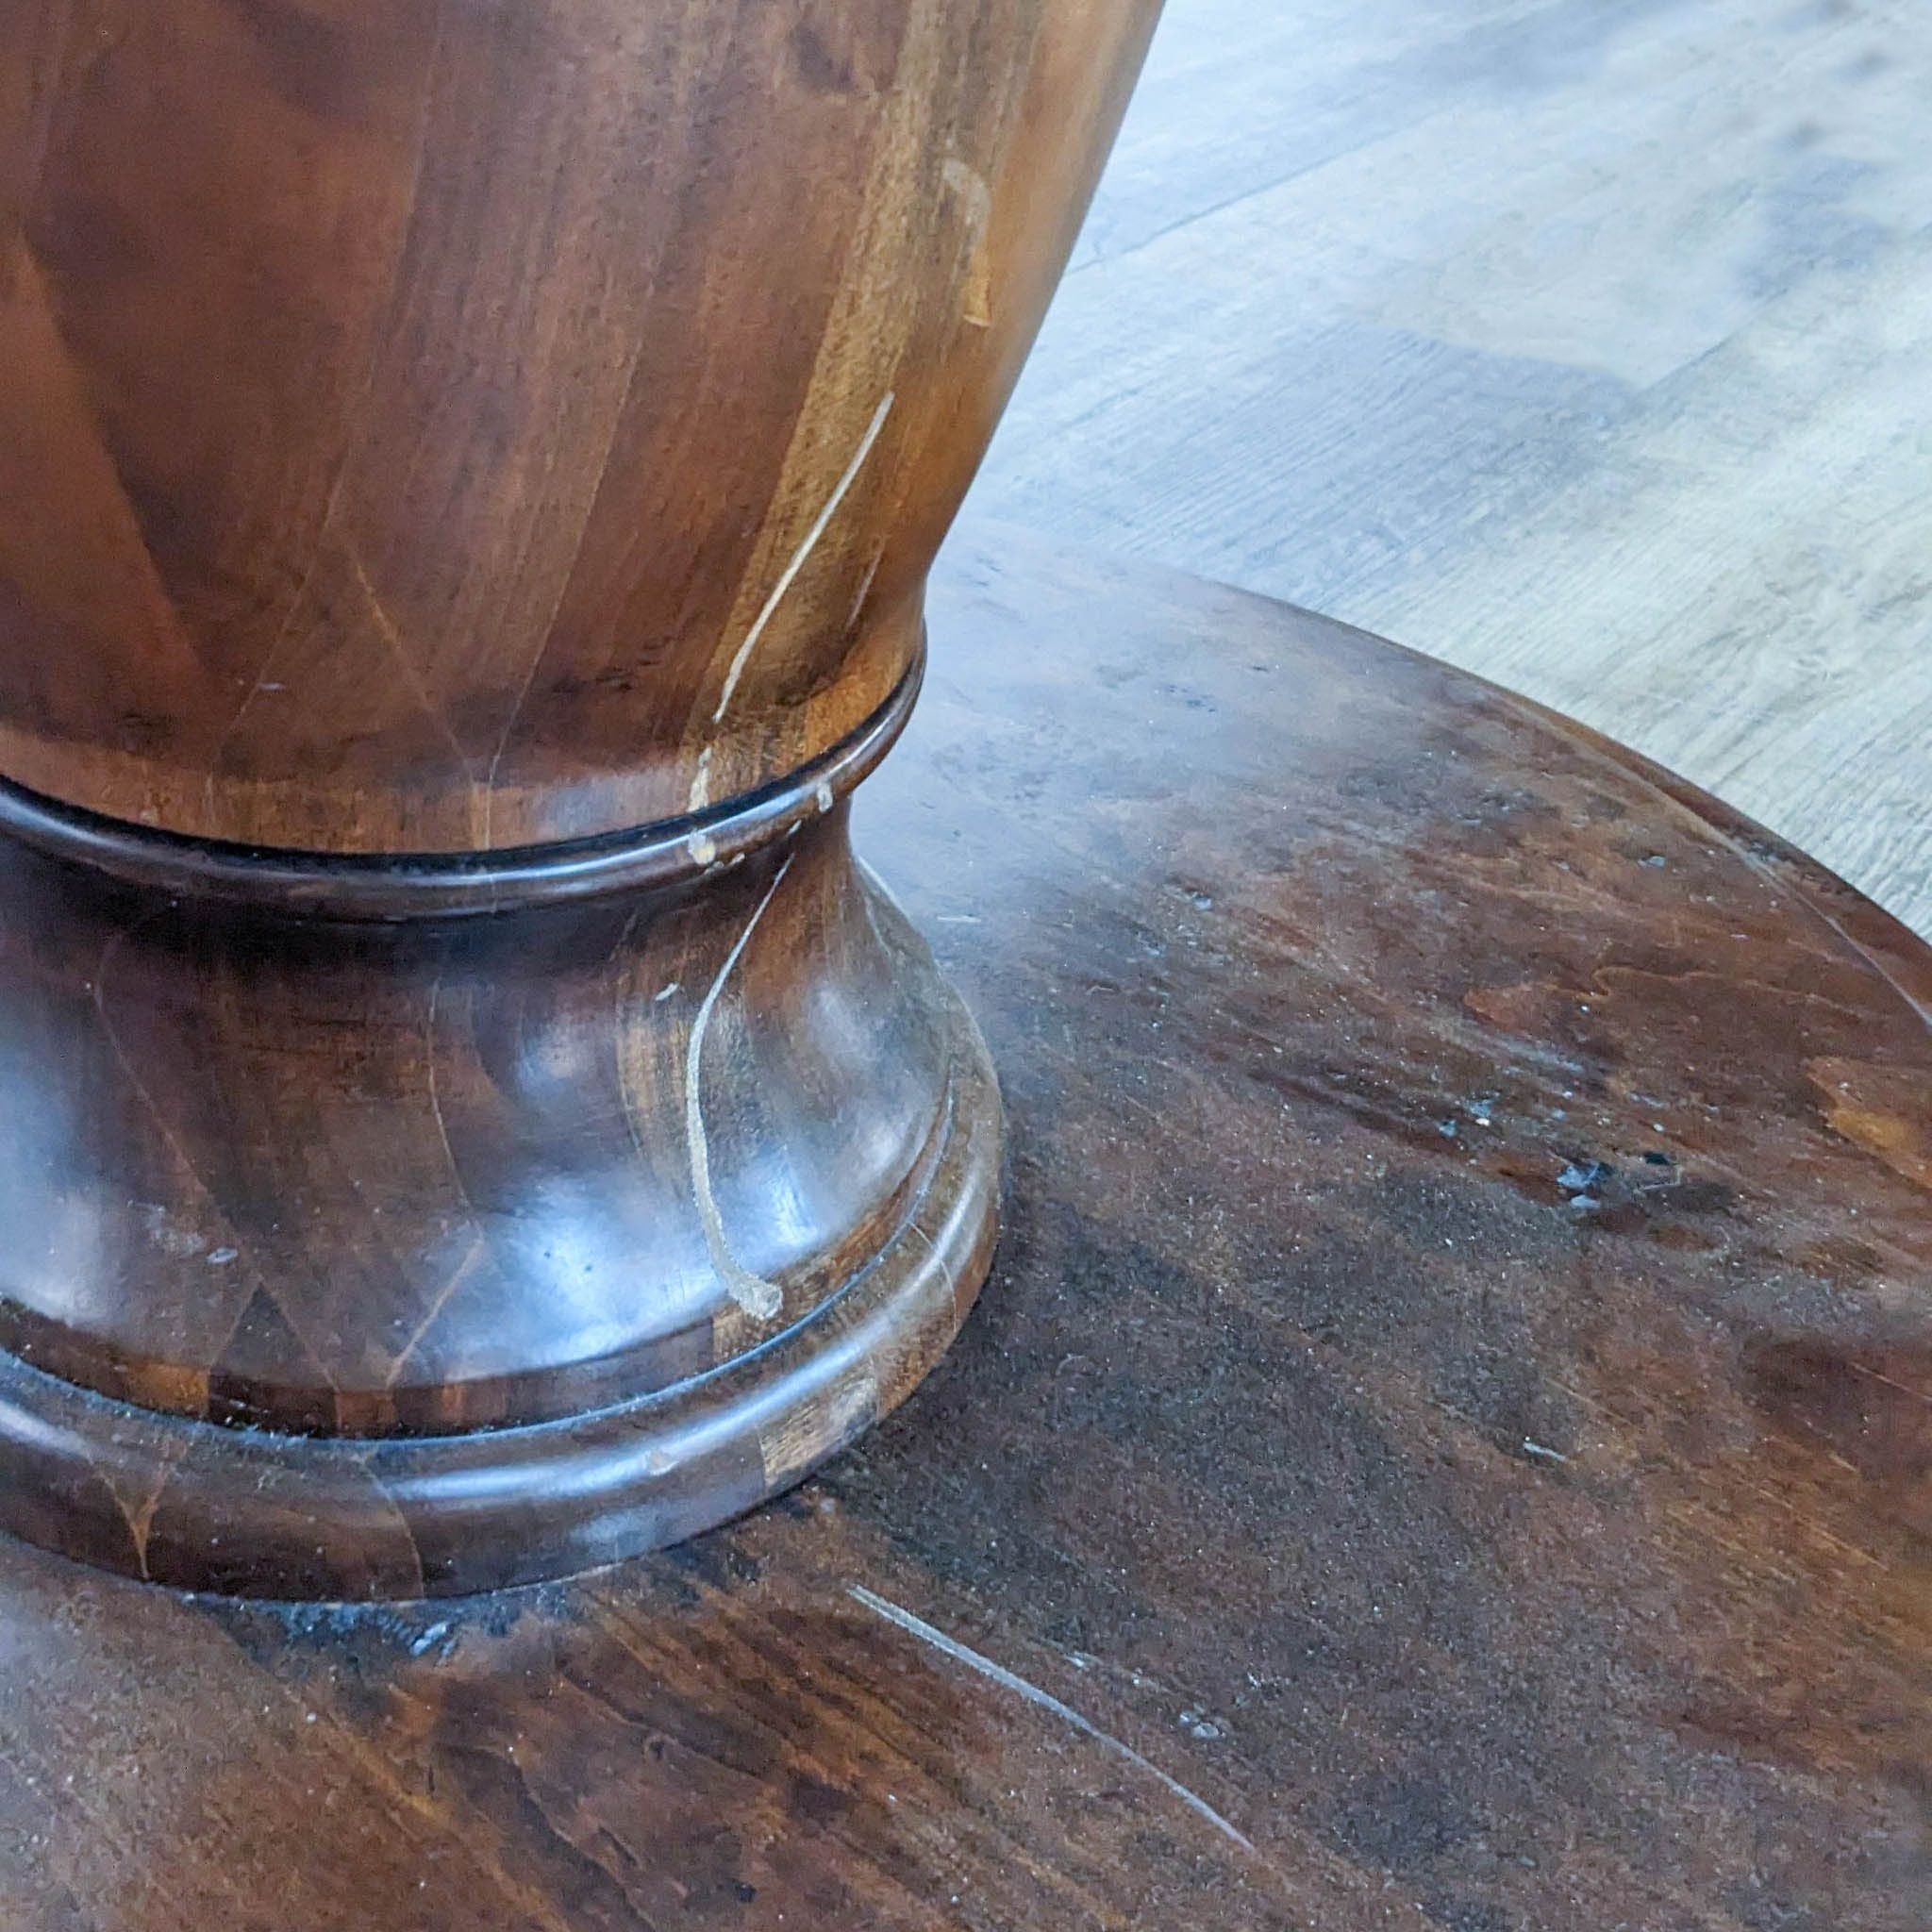 Close-up of the double pedestal base of a Reperch dark wooden dining table with visible wood grain and carving details.